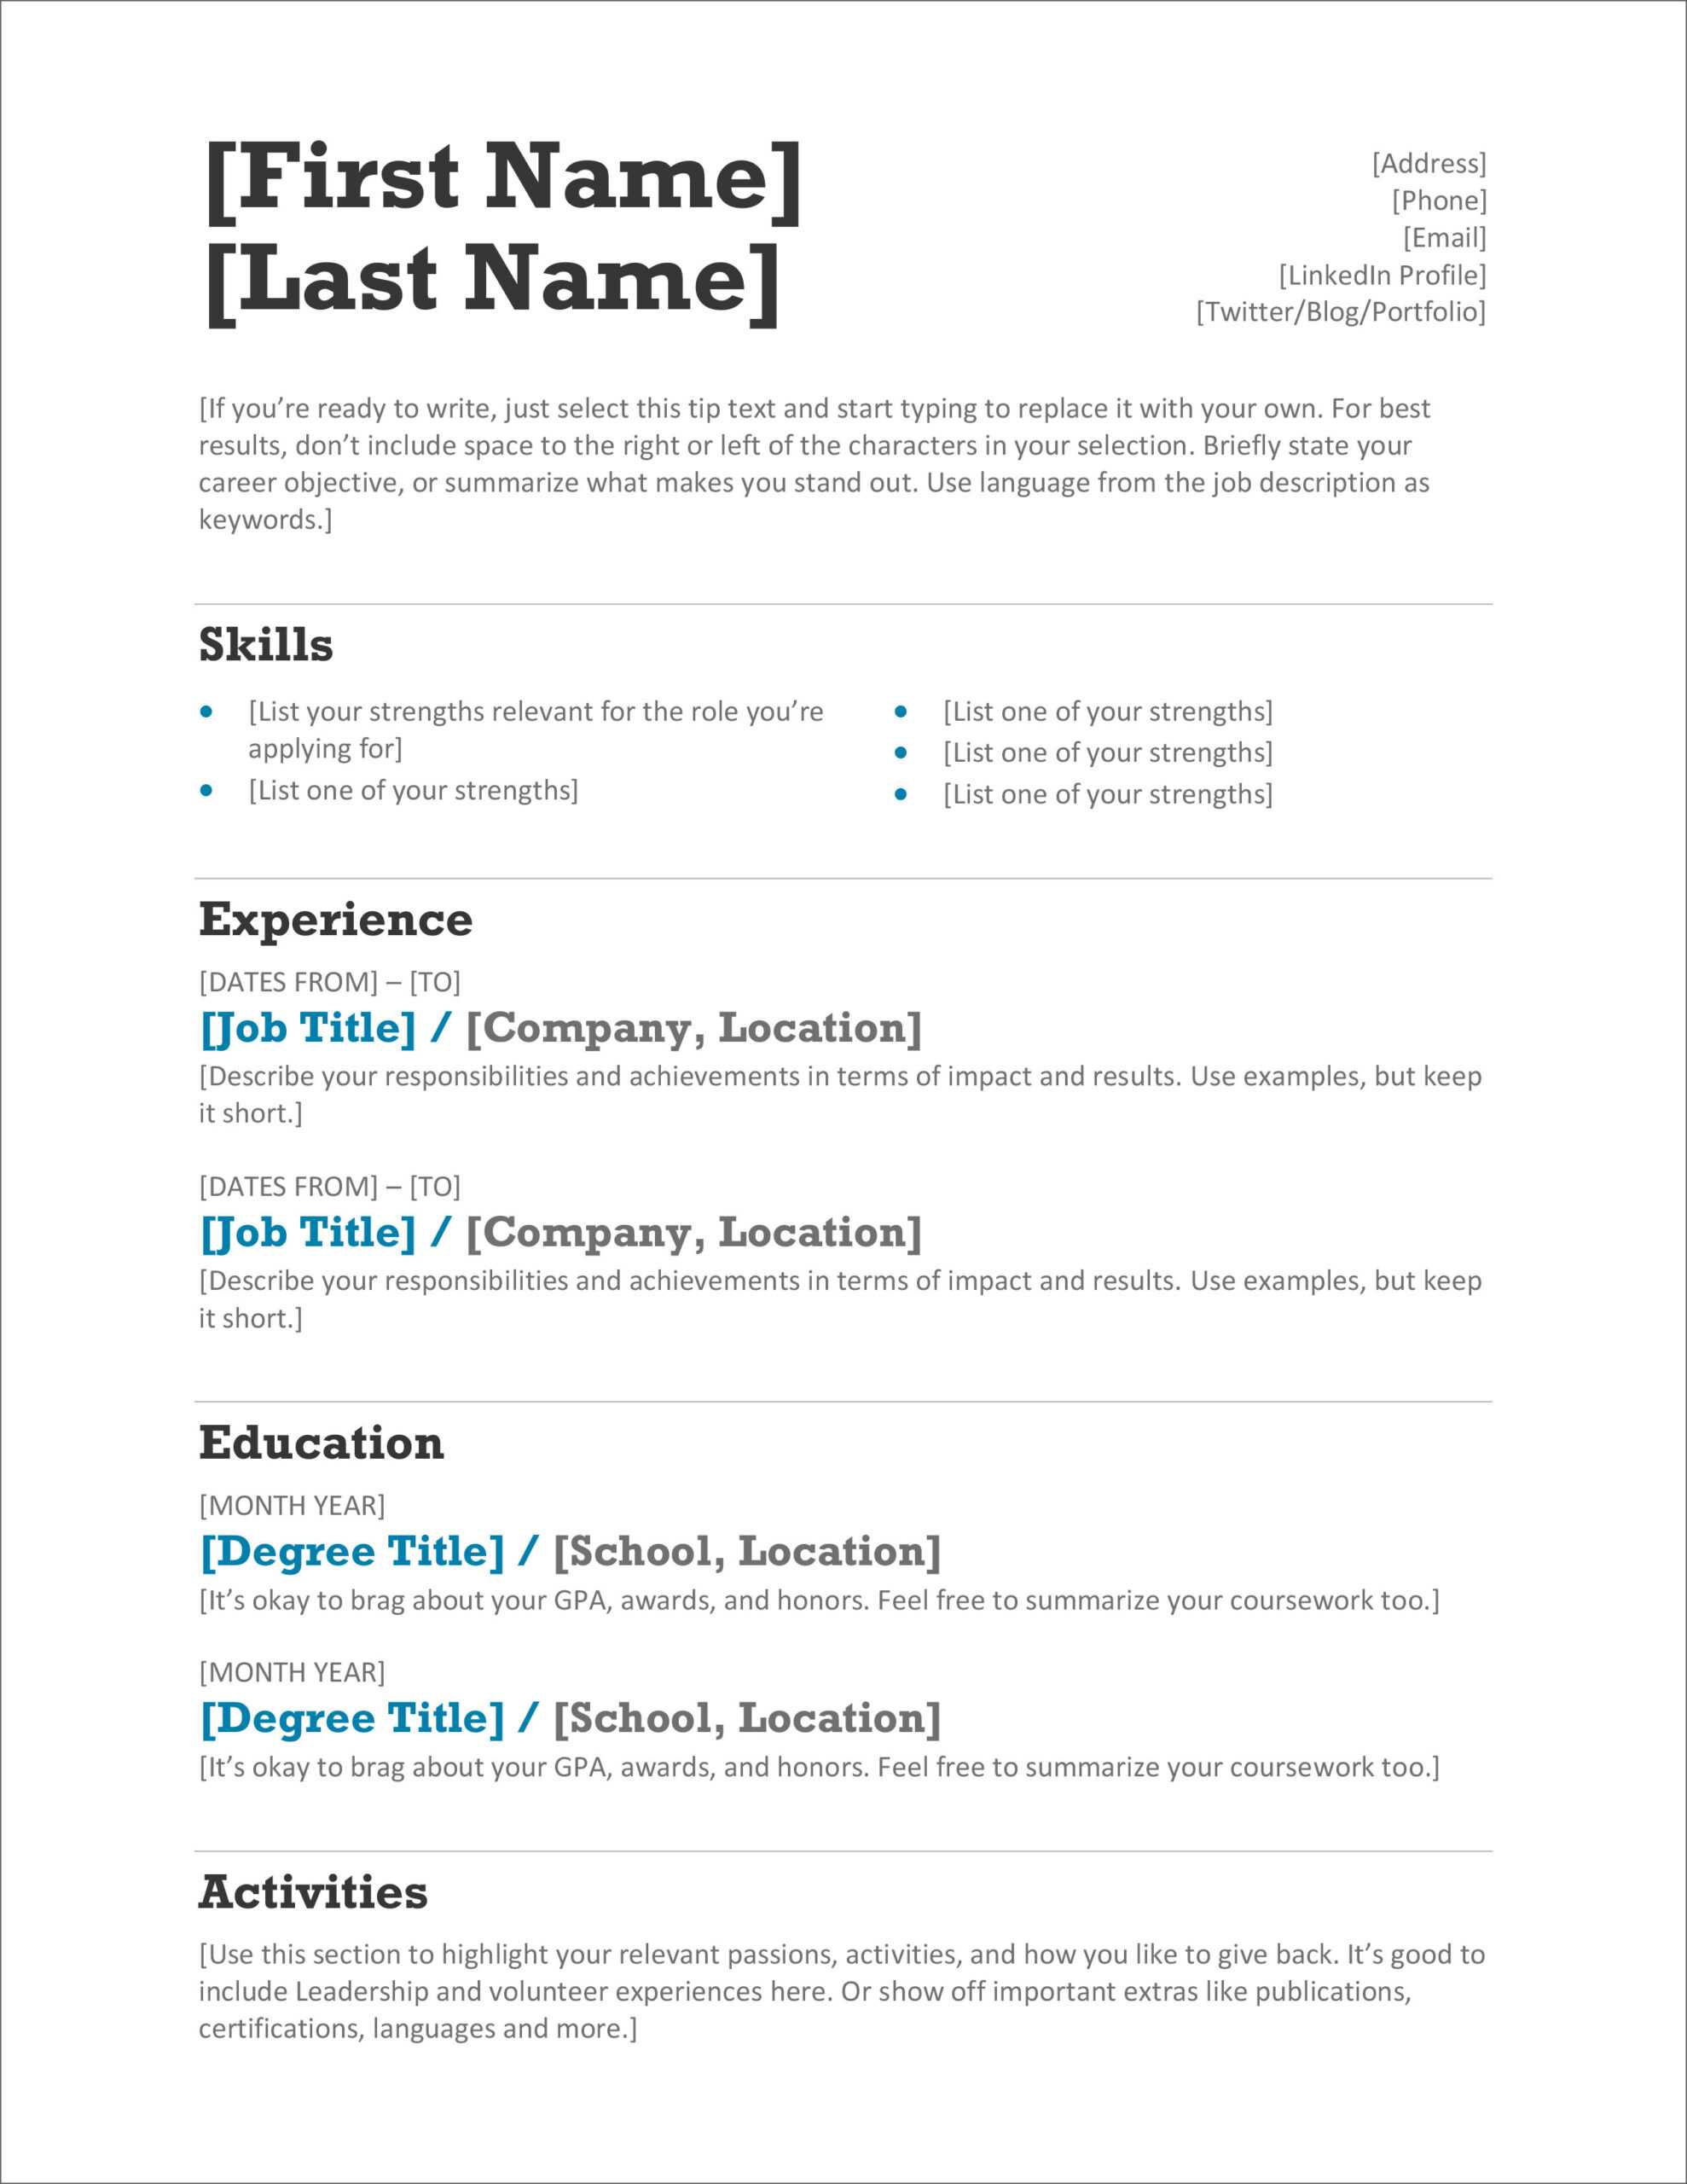 45 Free Modern Resume / Cv Templates – Minimalist, Simple With Regard To How To Make A Cv Template On Microsoft Word